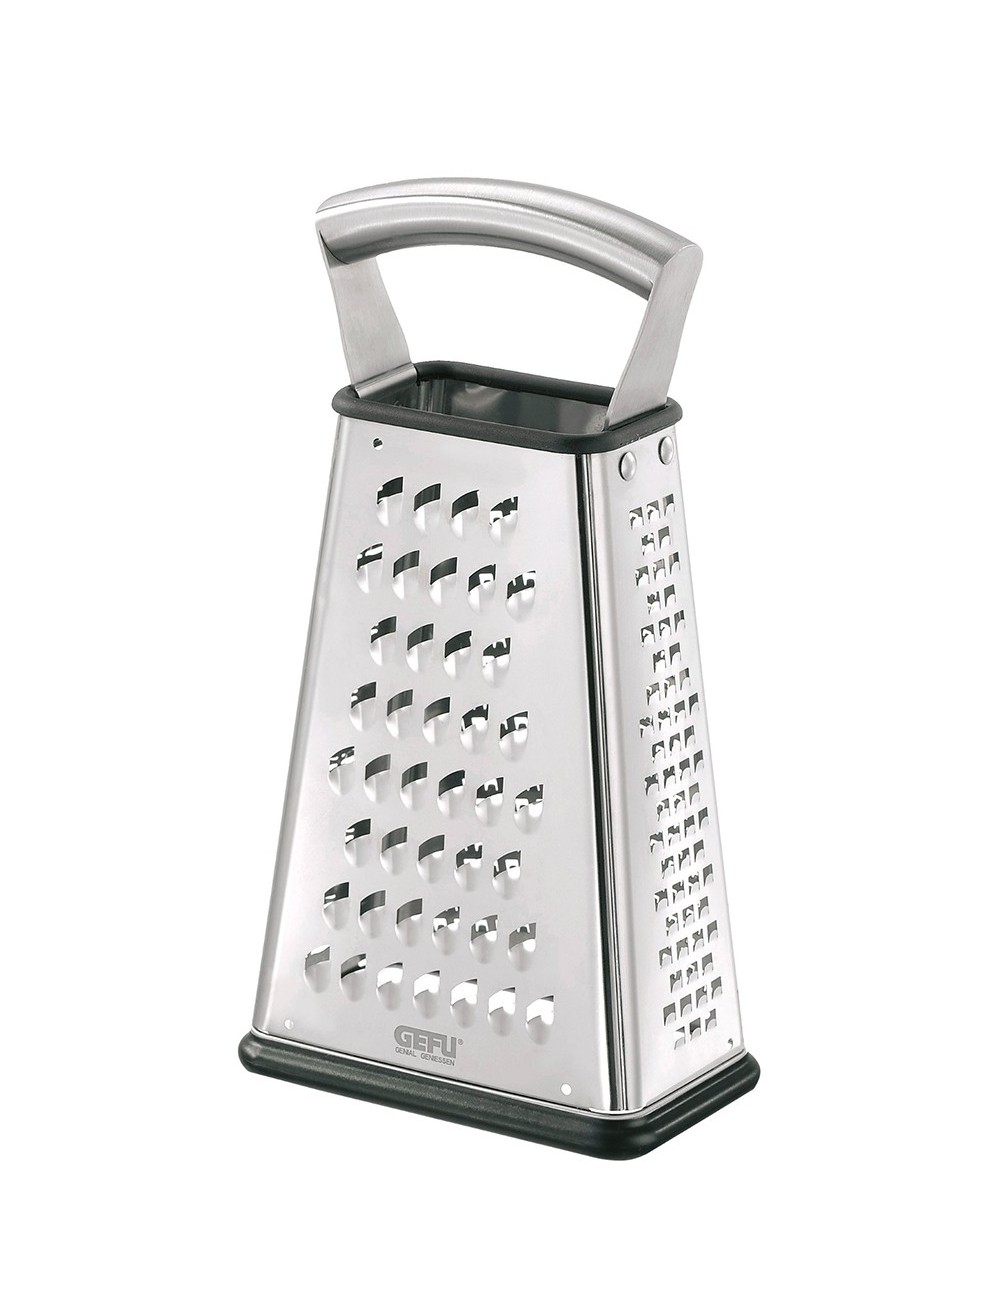 4-SIDED STAINLESS STEEL GRATER - PURCHASE OF KITCHEN